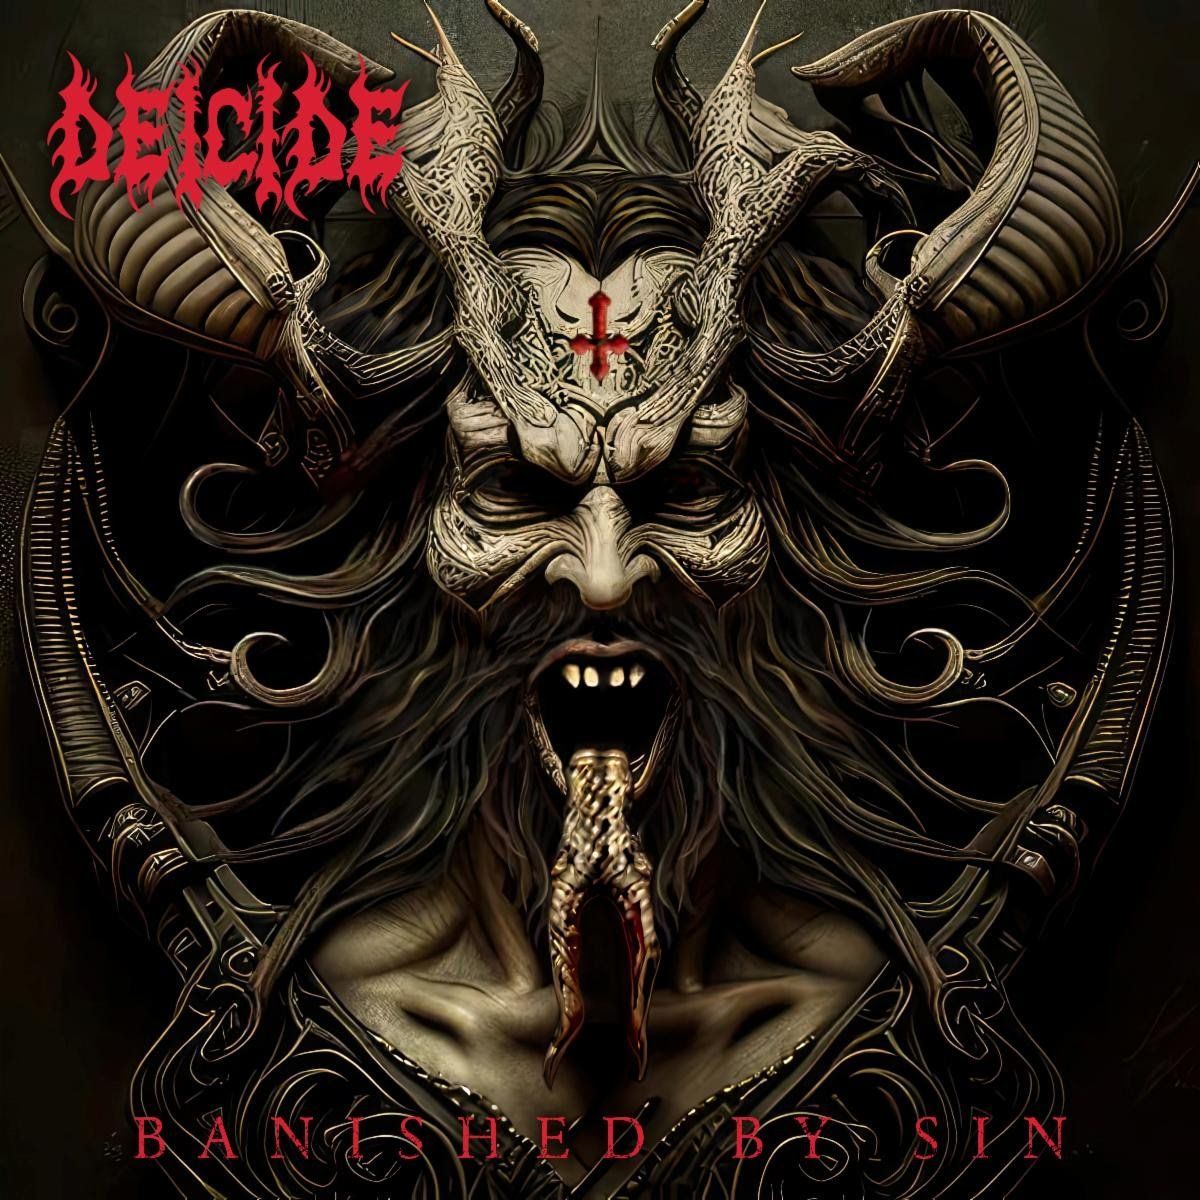 Death Metal titans DEICIDE released their 13th full length album 'Banished by Sin' on Apr 26, 2024 via Reigning Phoenix Music. What do you think of new album? #deicide #banishedbysin #deathmetal #brutaldeathmetal #extrememetal #metal #metaltwitter #metalmusic #heavymetal @r_p_m